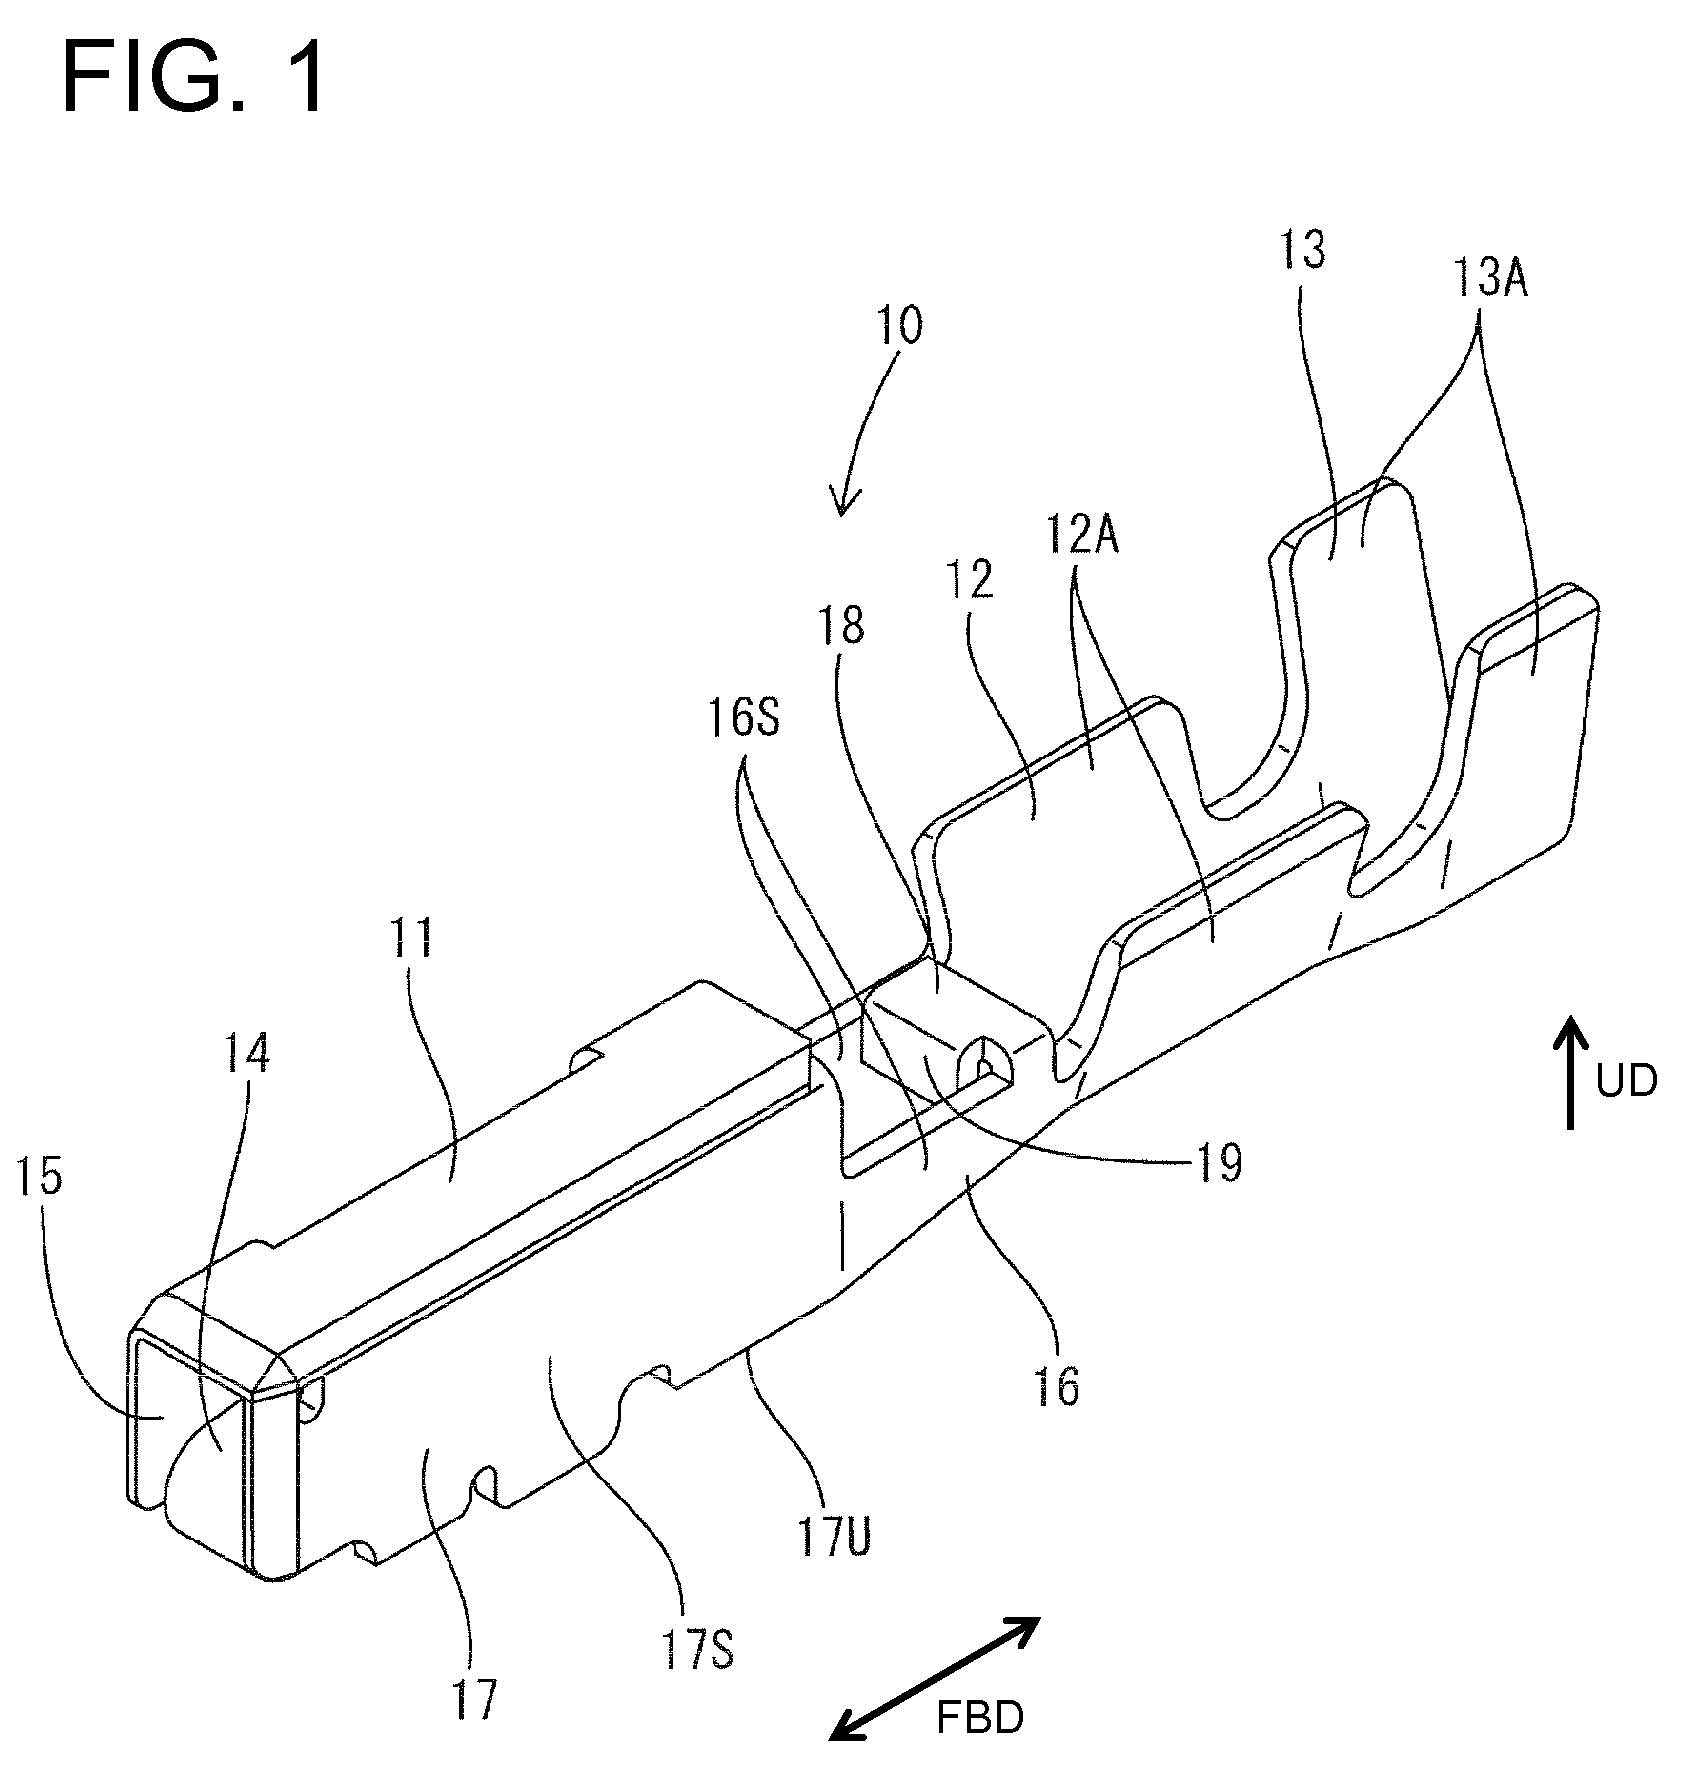 Terminal fitting with a wire restriction